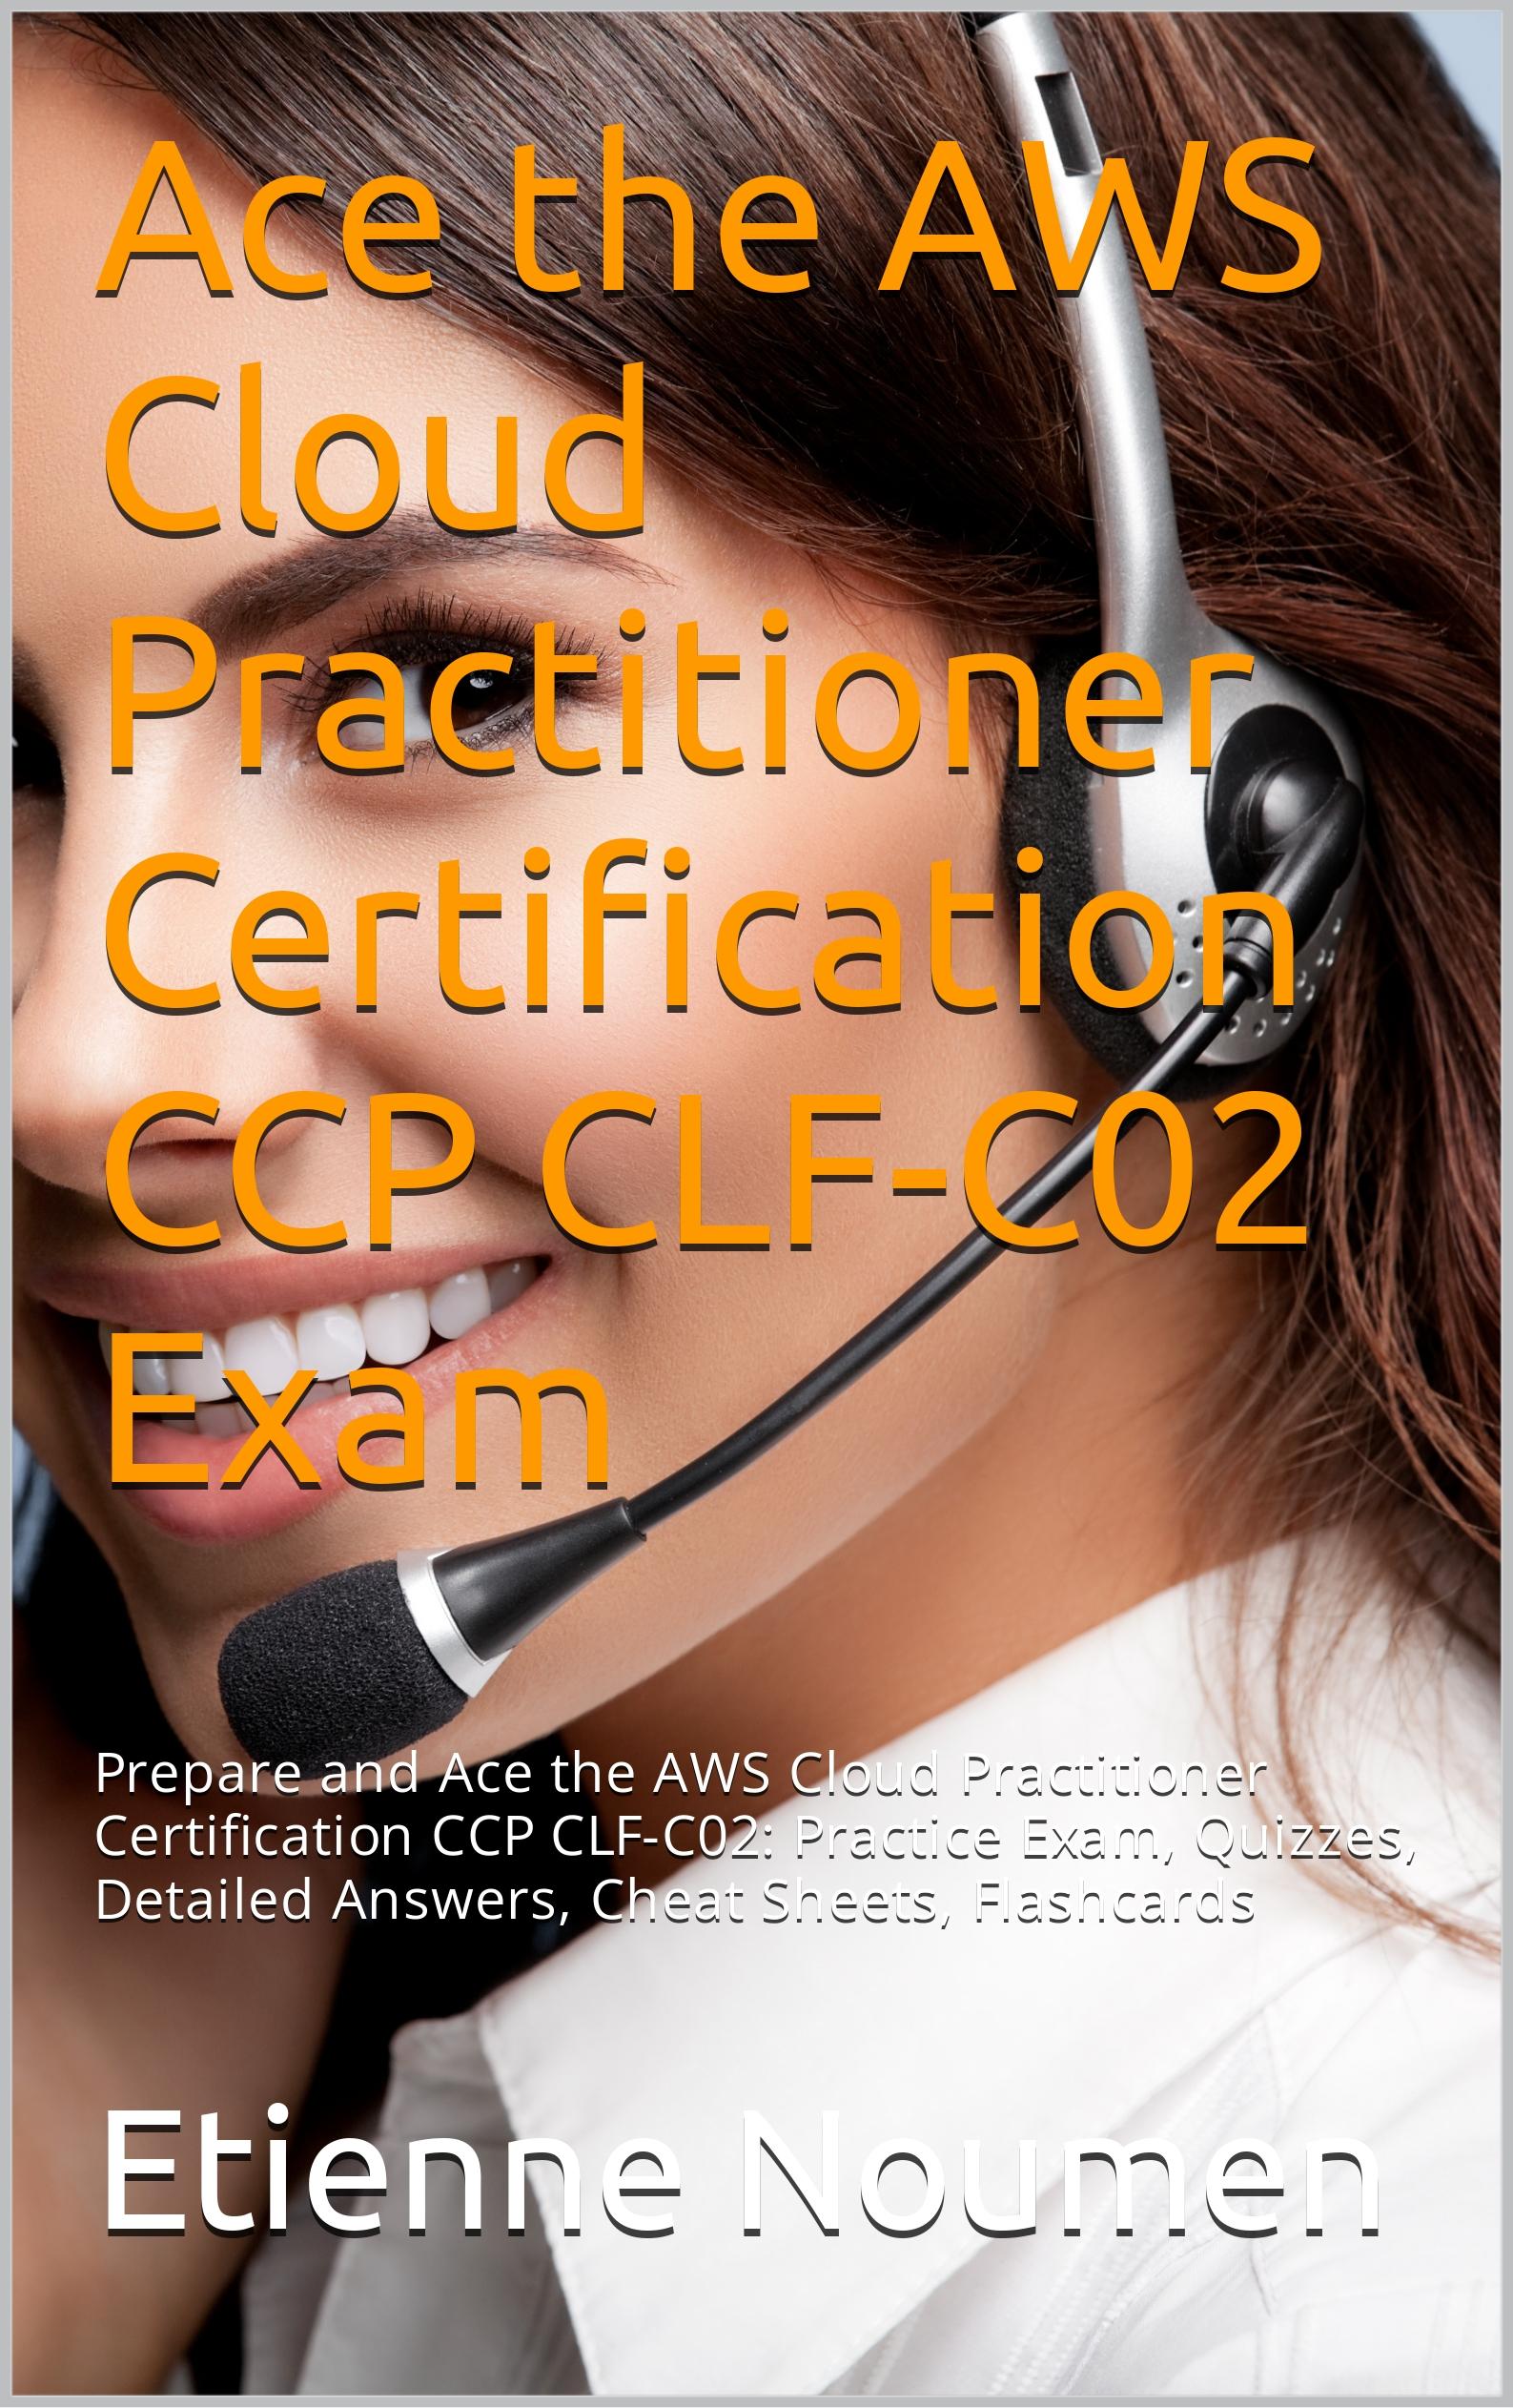 If you are looking for an all-in-one solution to help you prepare for the AWS Cloud Practitioner Certification Exam, look no further than this AWS Cloud Practitioner CCP CLF-C02 book